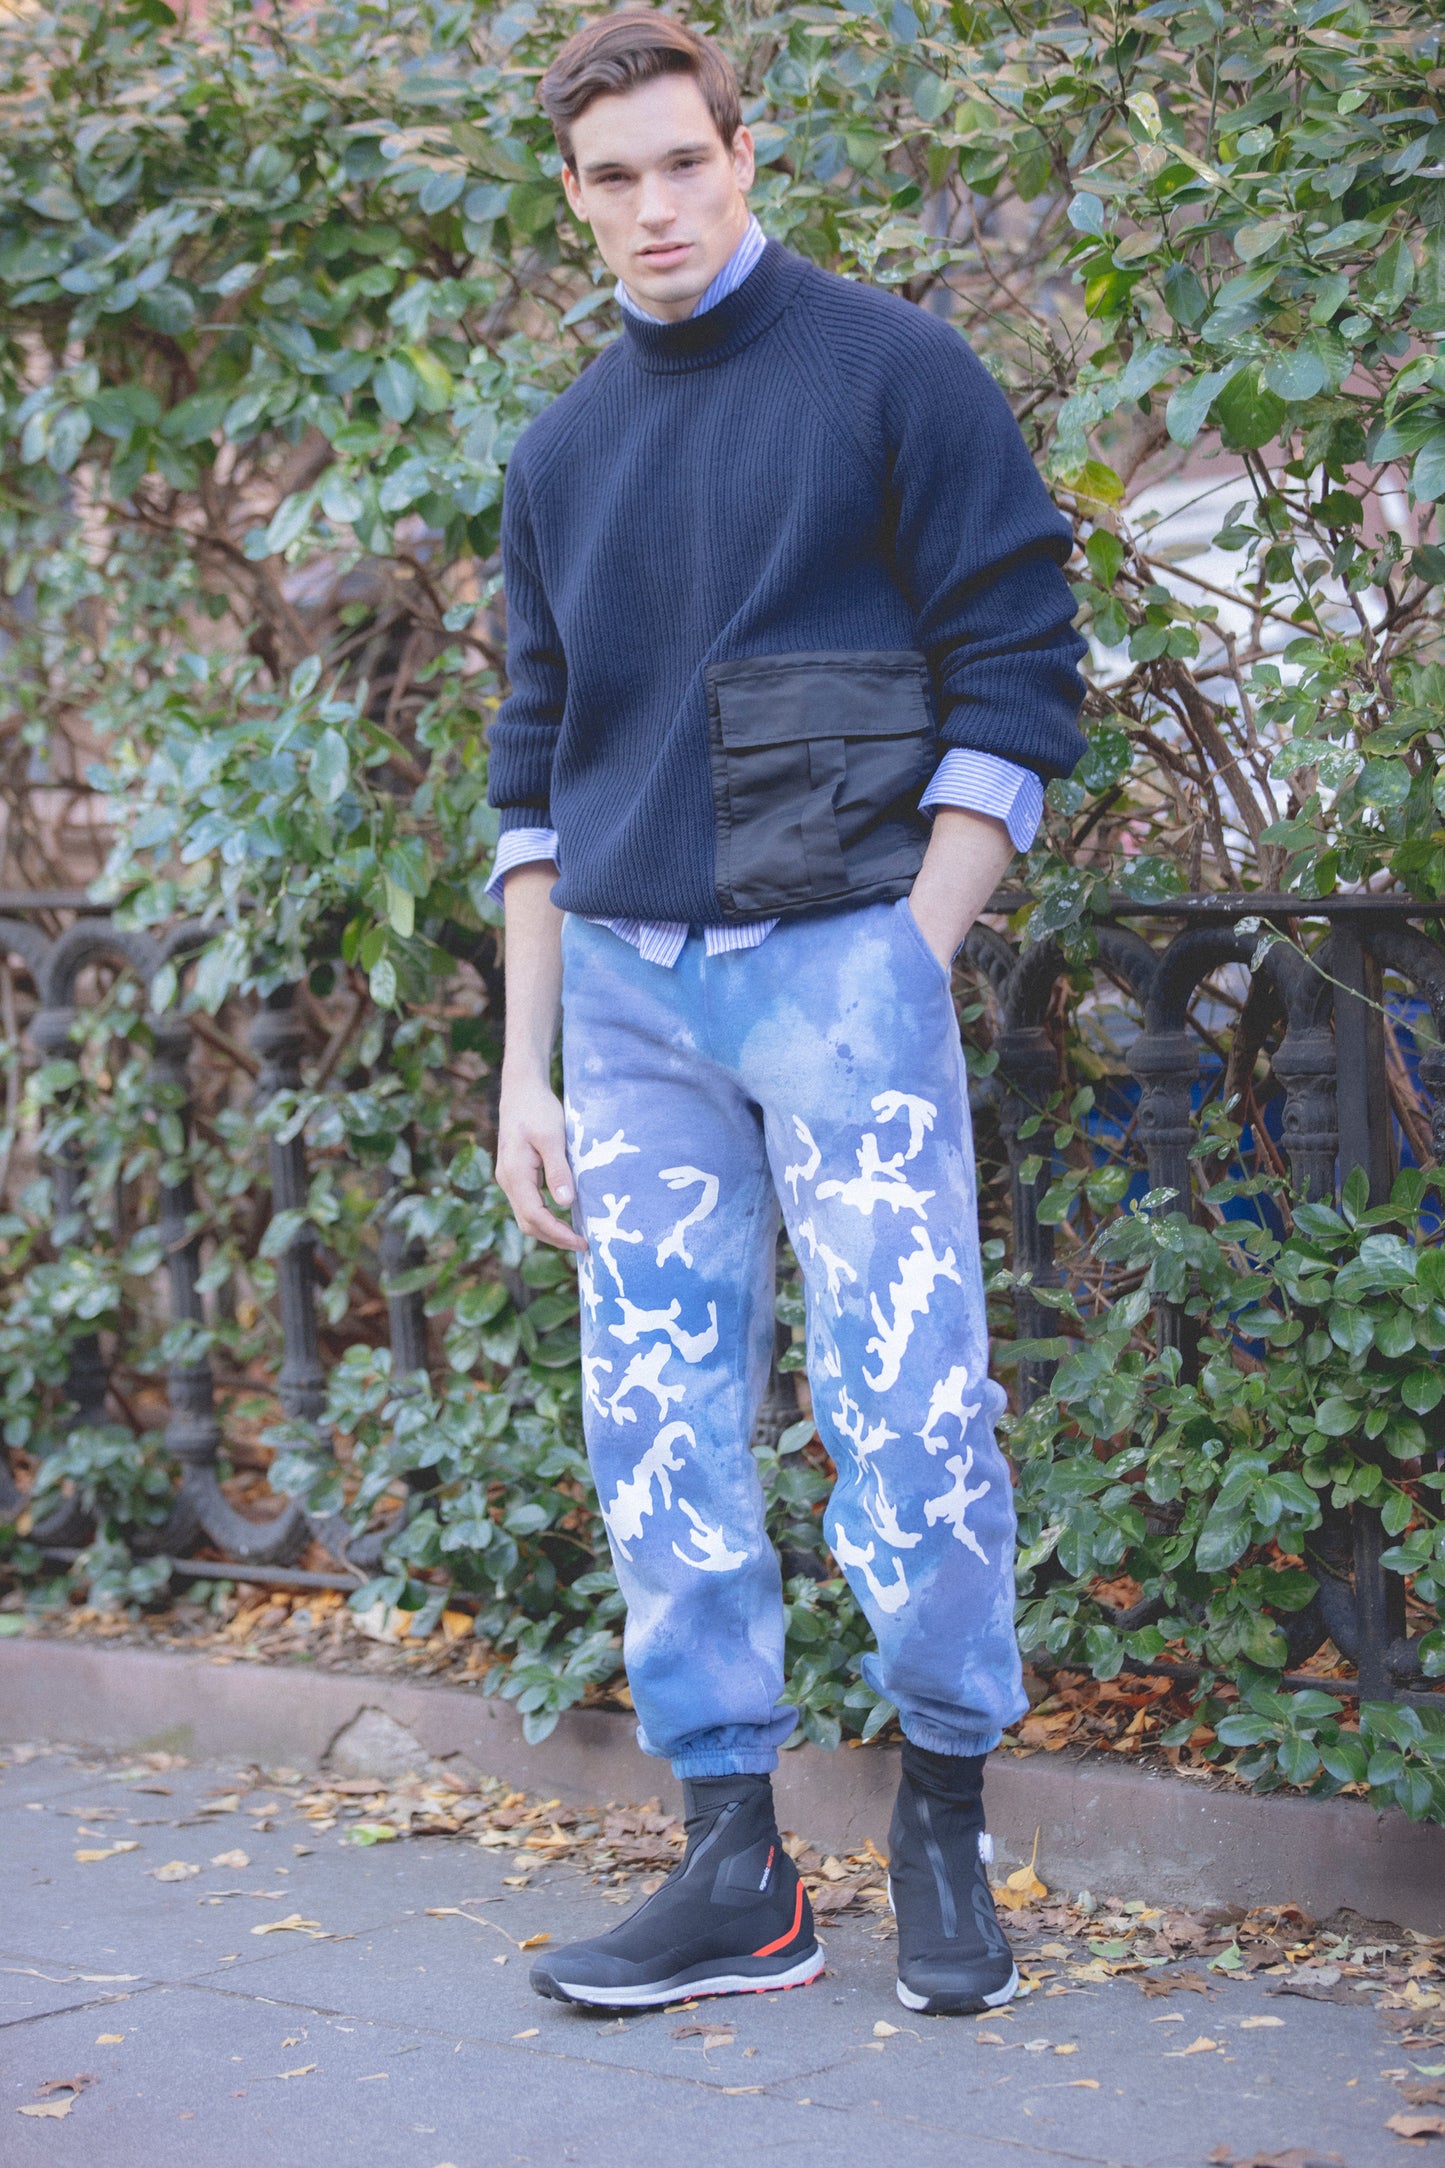 Model Mason McKenrick wearing Avon Anglers oversize navy sweater and hand painted and printed camo sweatpants on the street in brooklyn, designed by Patrik Rzepski.